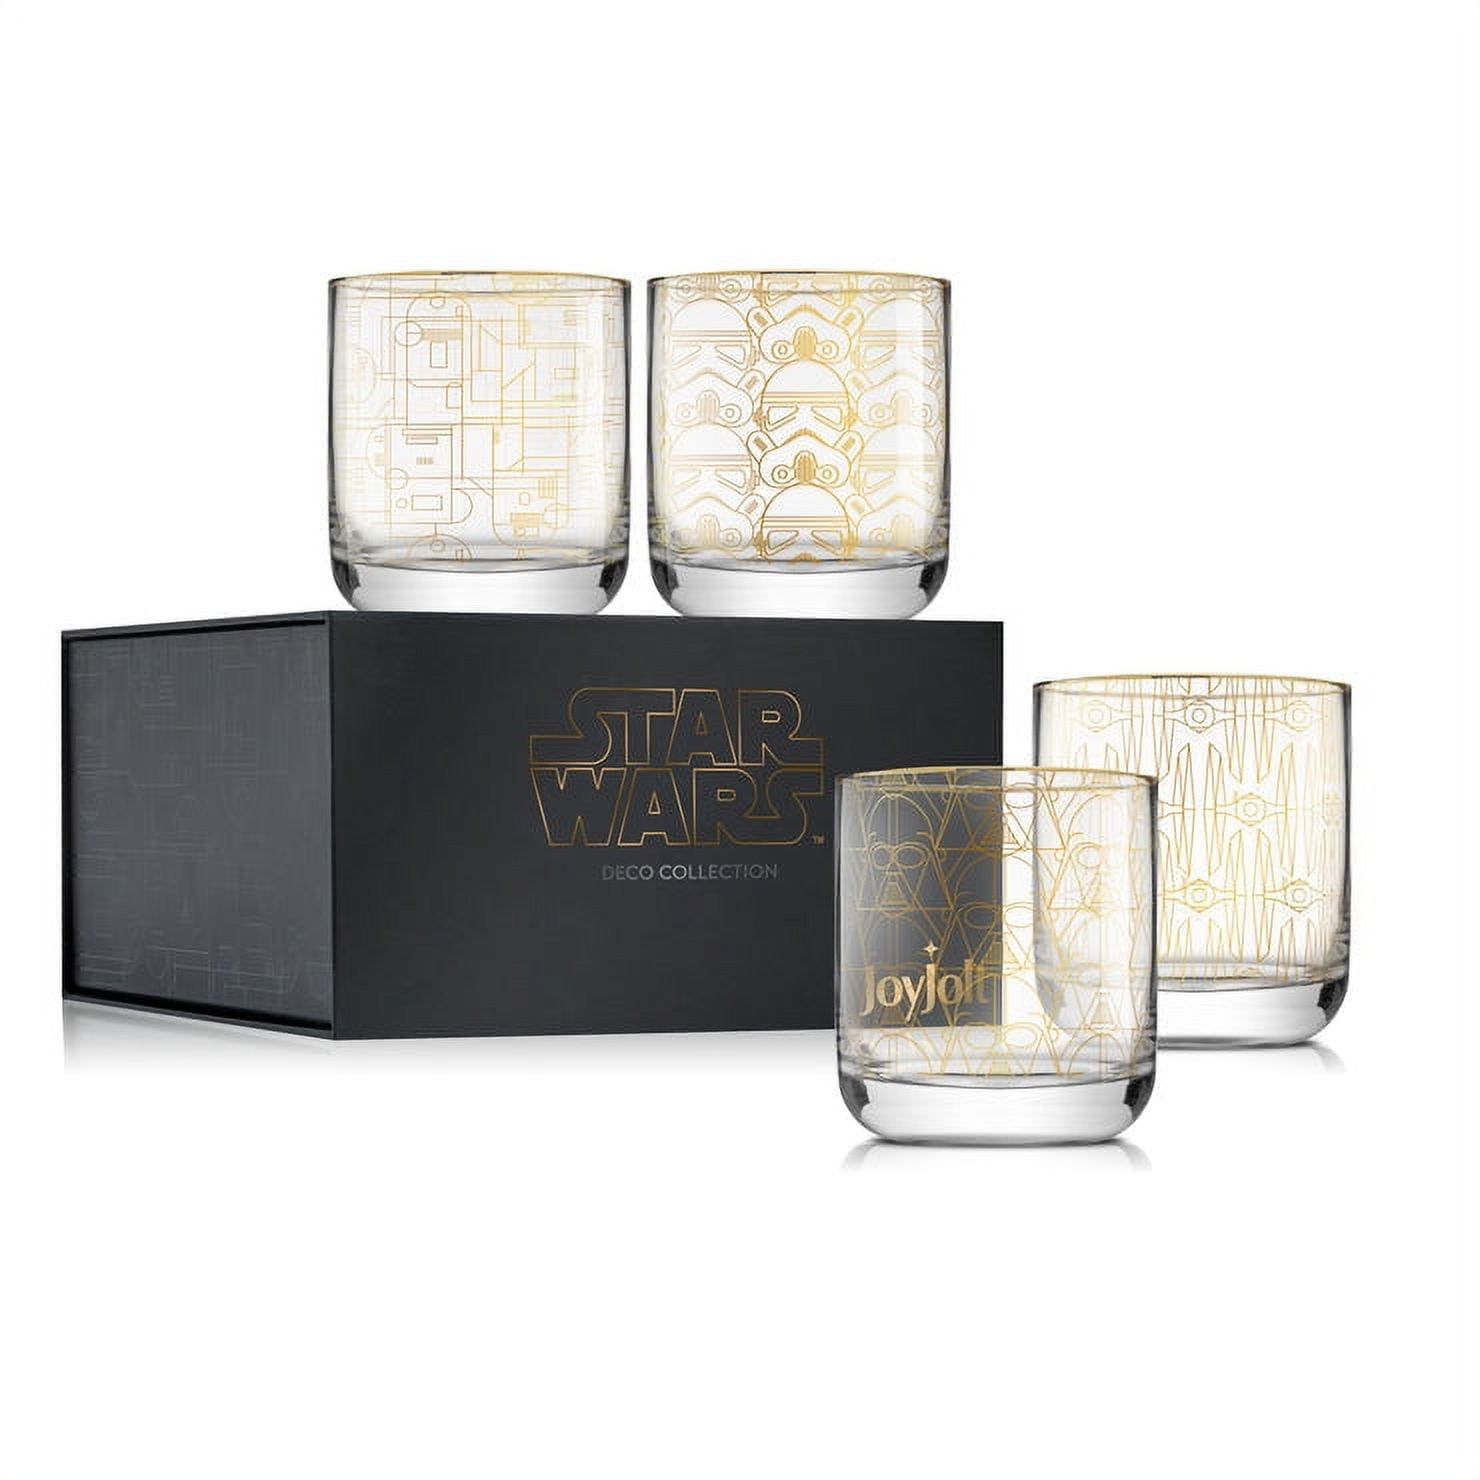 Star Wars Glass Set - Death Star - Collectible Gift Set of 2 Glasses - 10 oz Capacity - Classic Design - Heavy Base